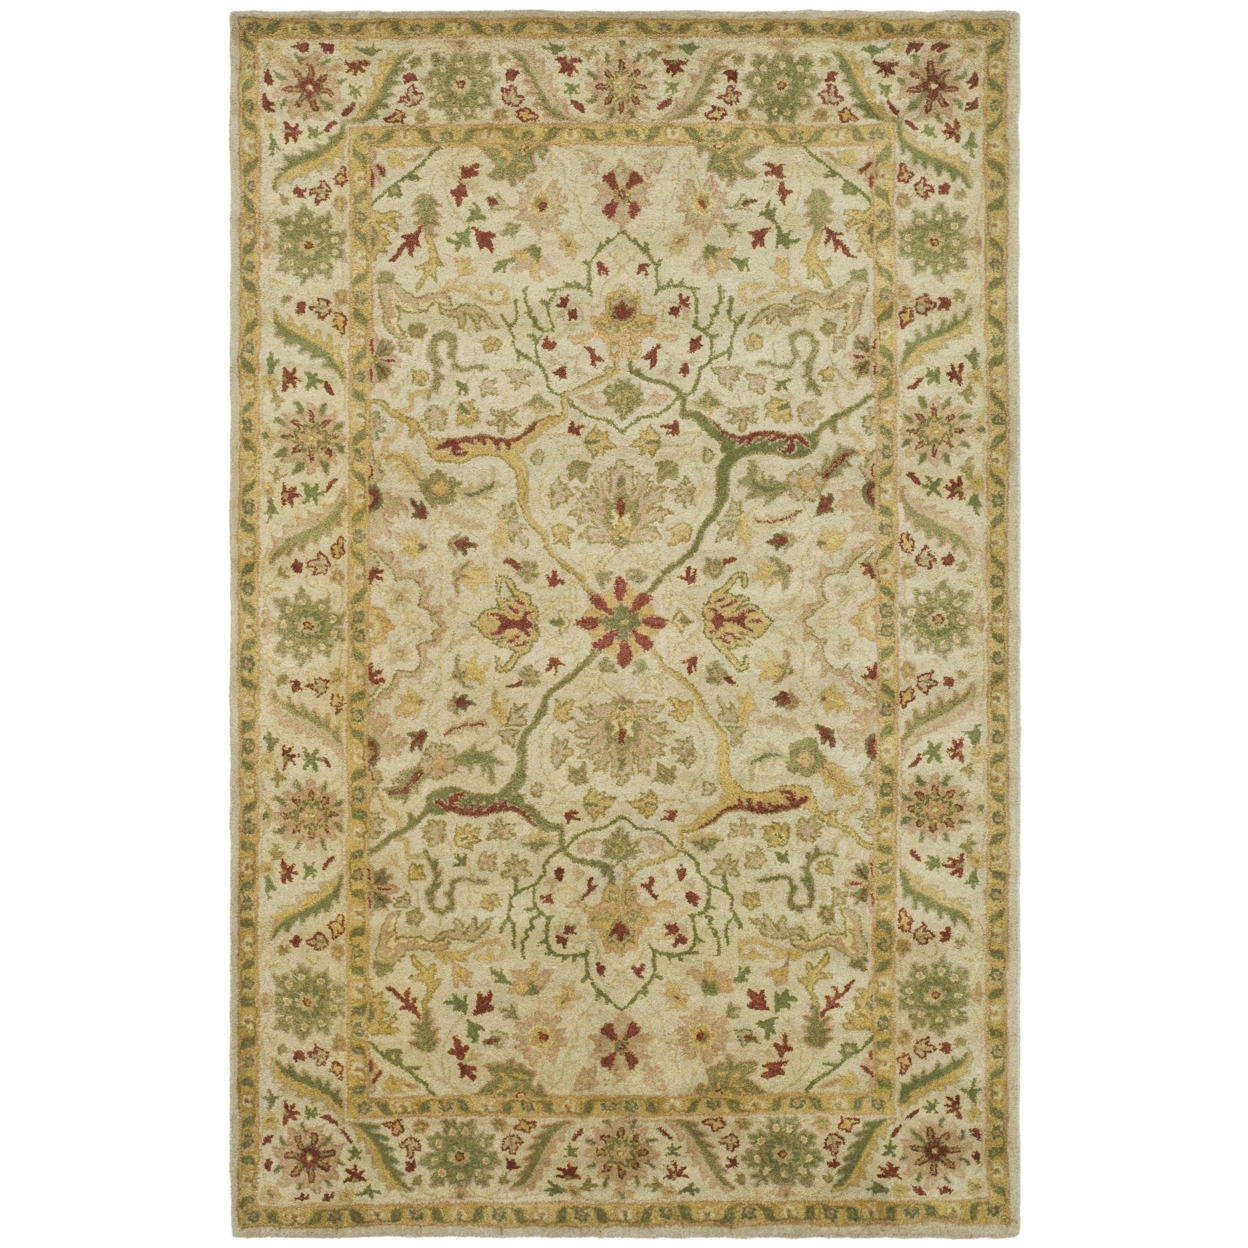 SAFAVIEH AT14A Antiquity Ivory - 4' 6 X 6' 6 Oval